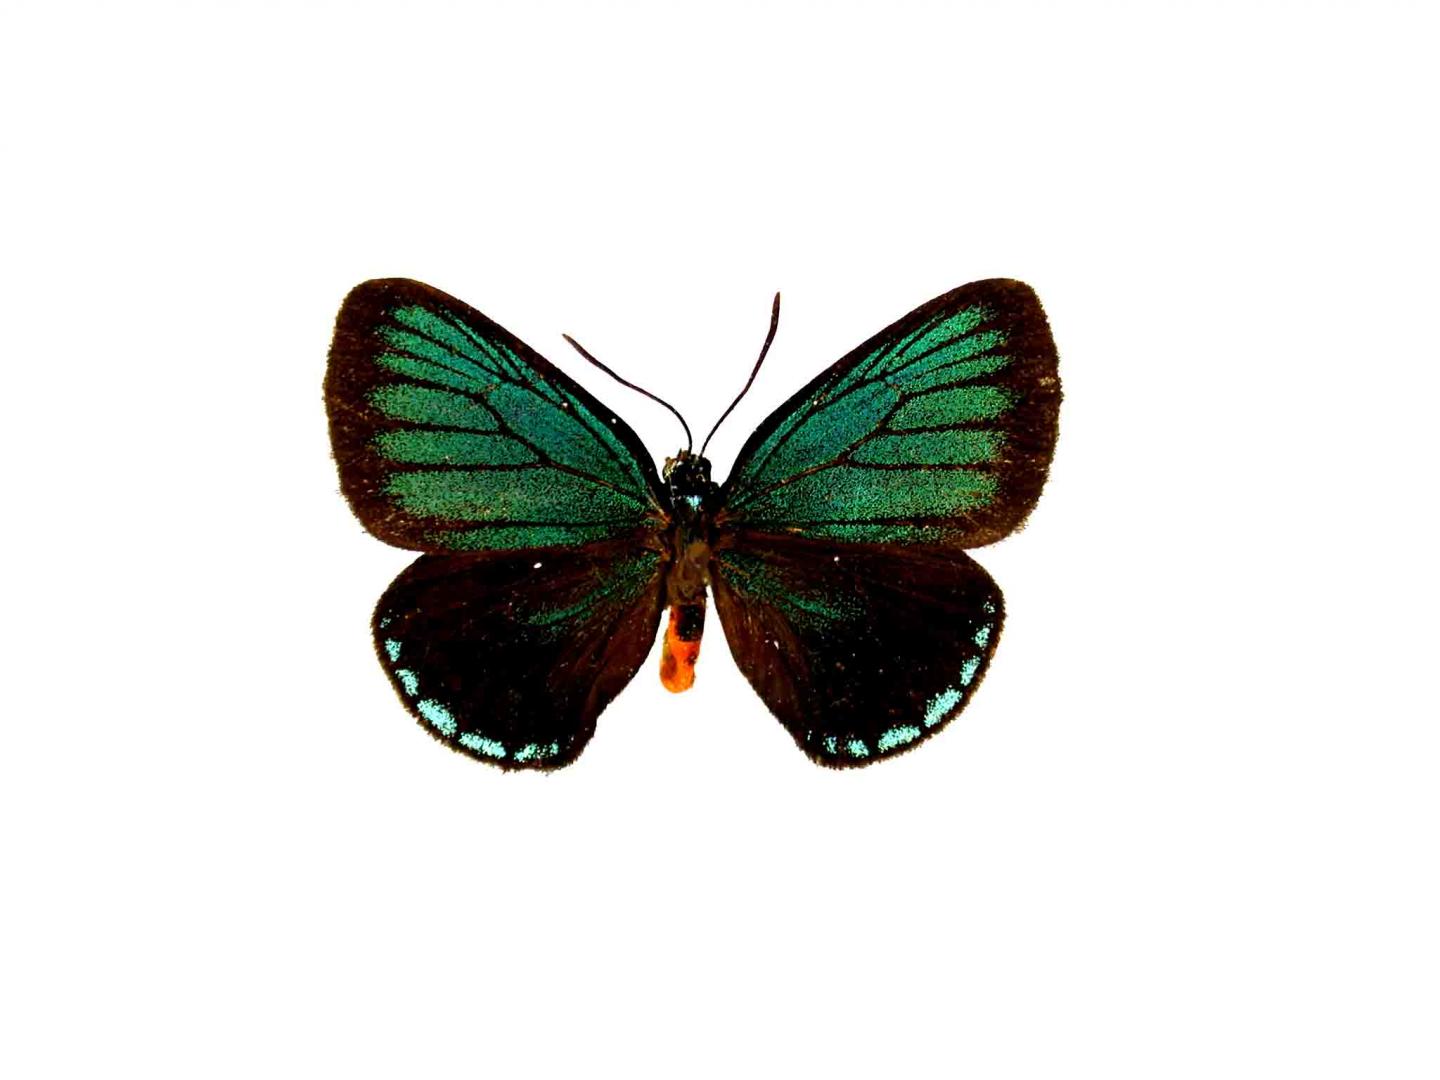 A male Atala butterfly (Eumaeus atala) held in the Smithsonian collections seen from above.